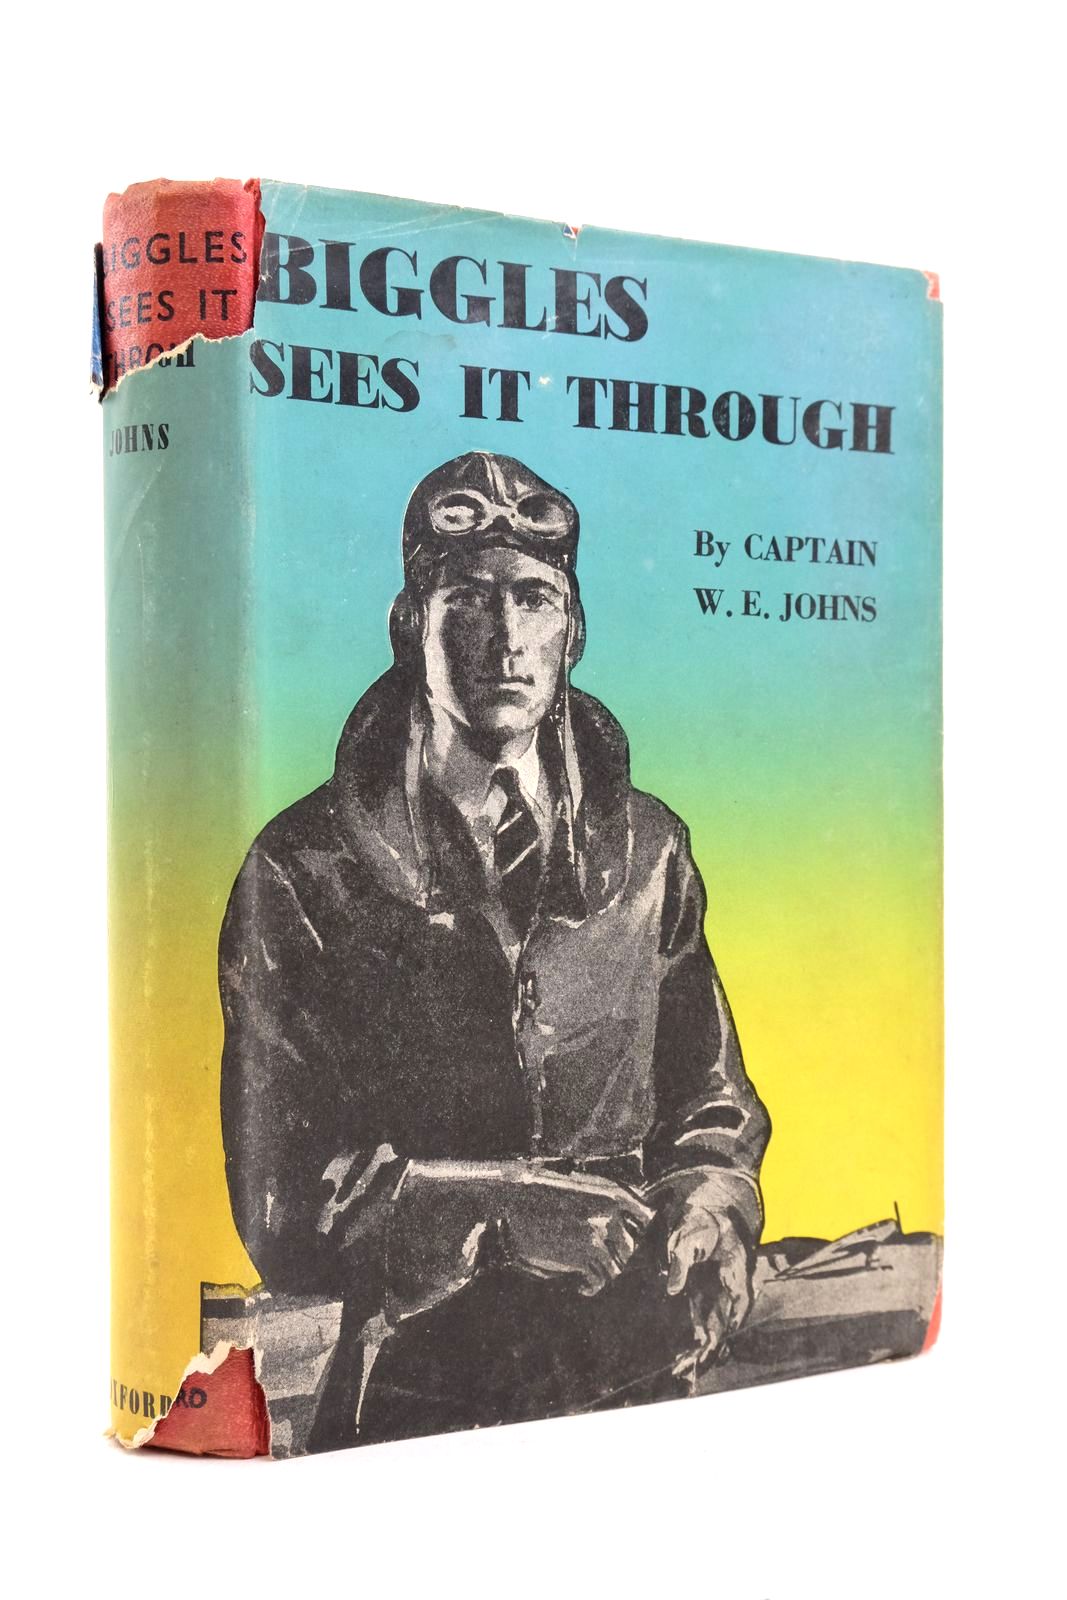 Photo of BIGGLES SEES IT THROUGH written by Johns, W.E. illustrated by Sindall, Alfred published by Geoffrey Cumberlege, Oxford University Press (STOCK CODE: 2139790)  for sale by Stella & Rose's Books